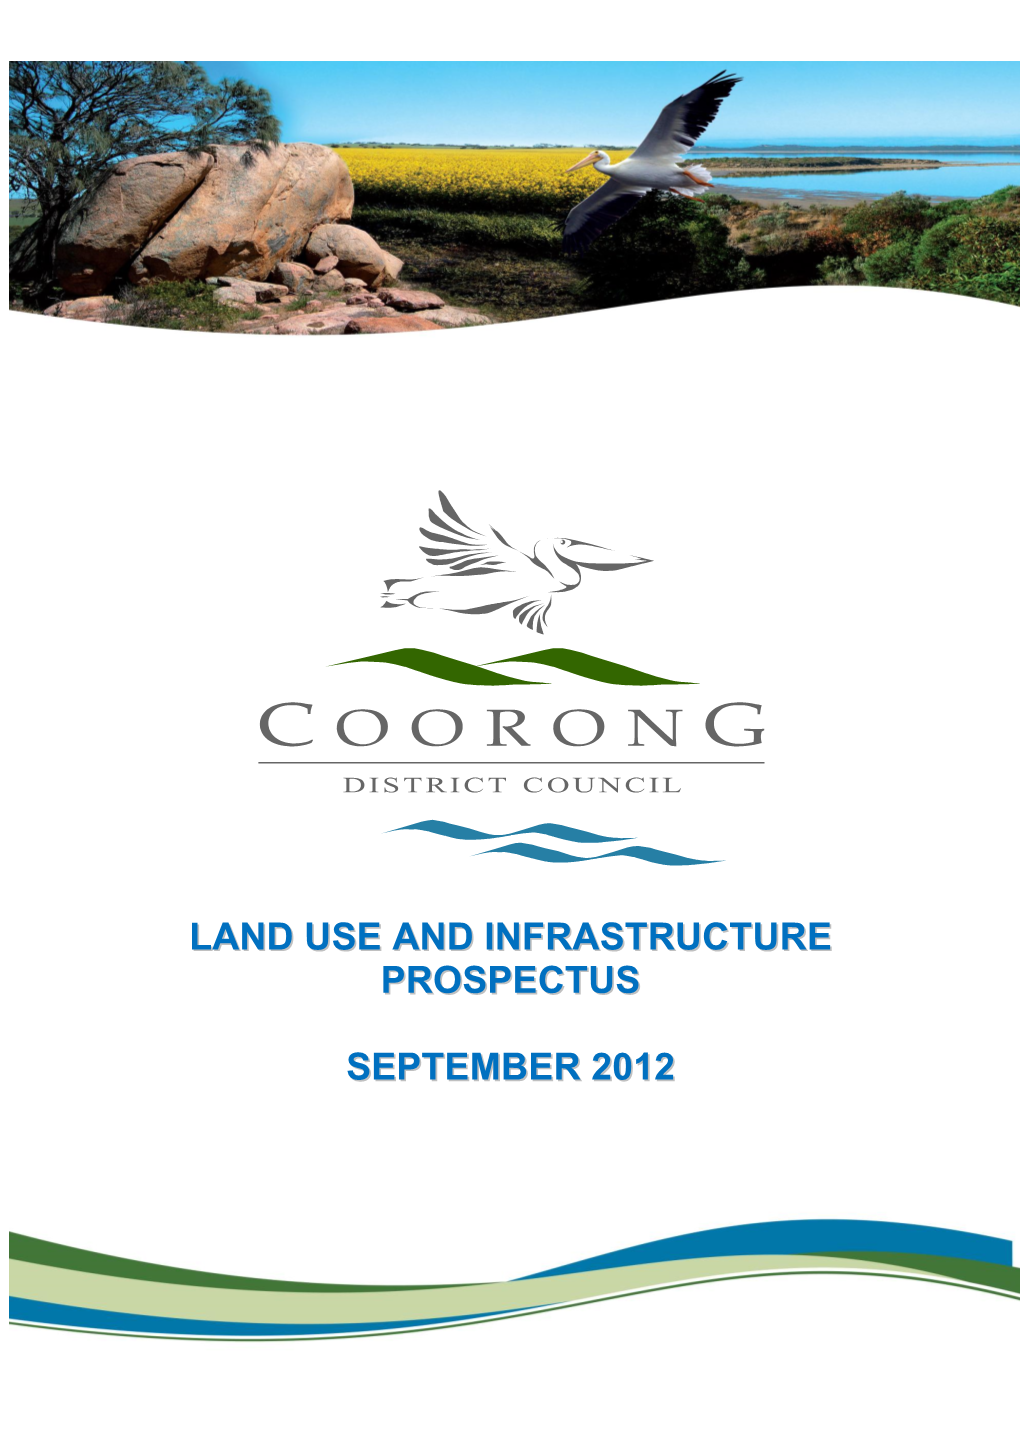 Land Use and Infrastructure Prospectus September 2012